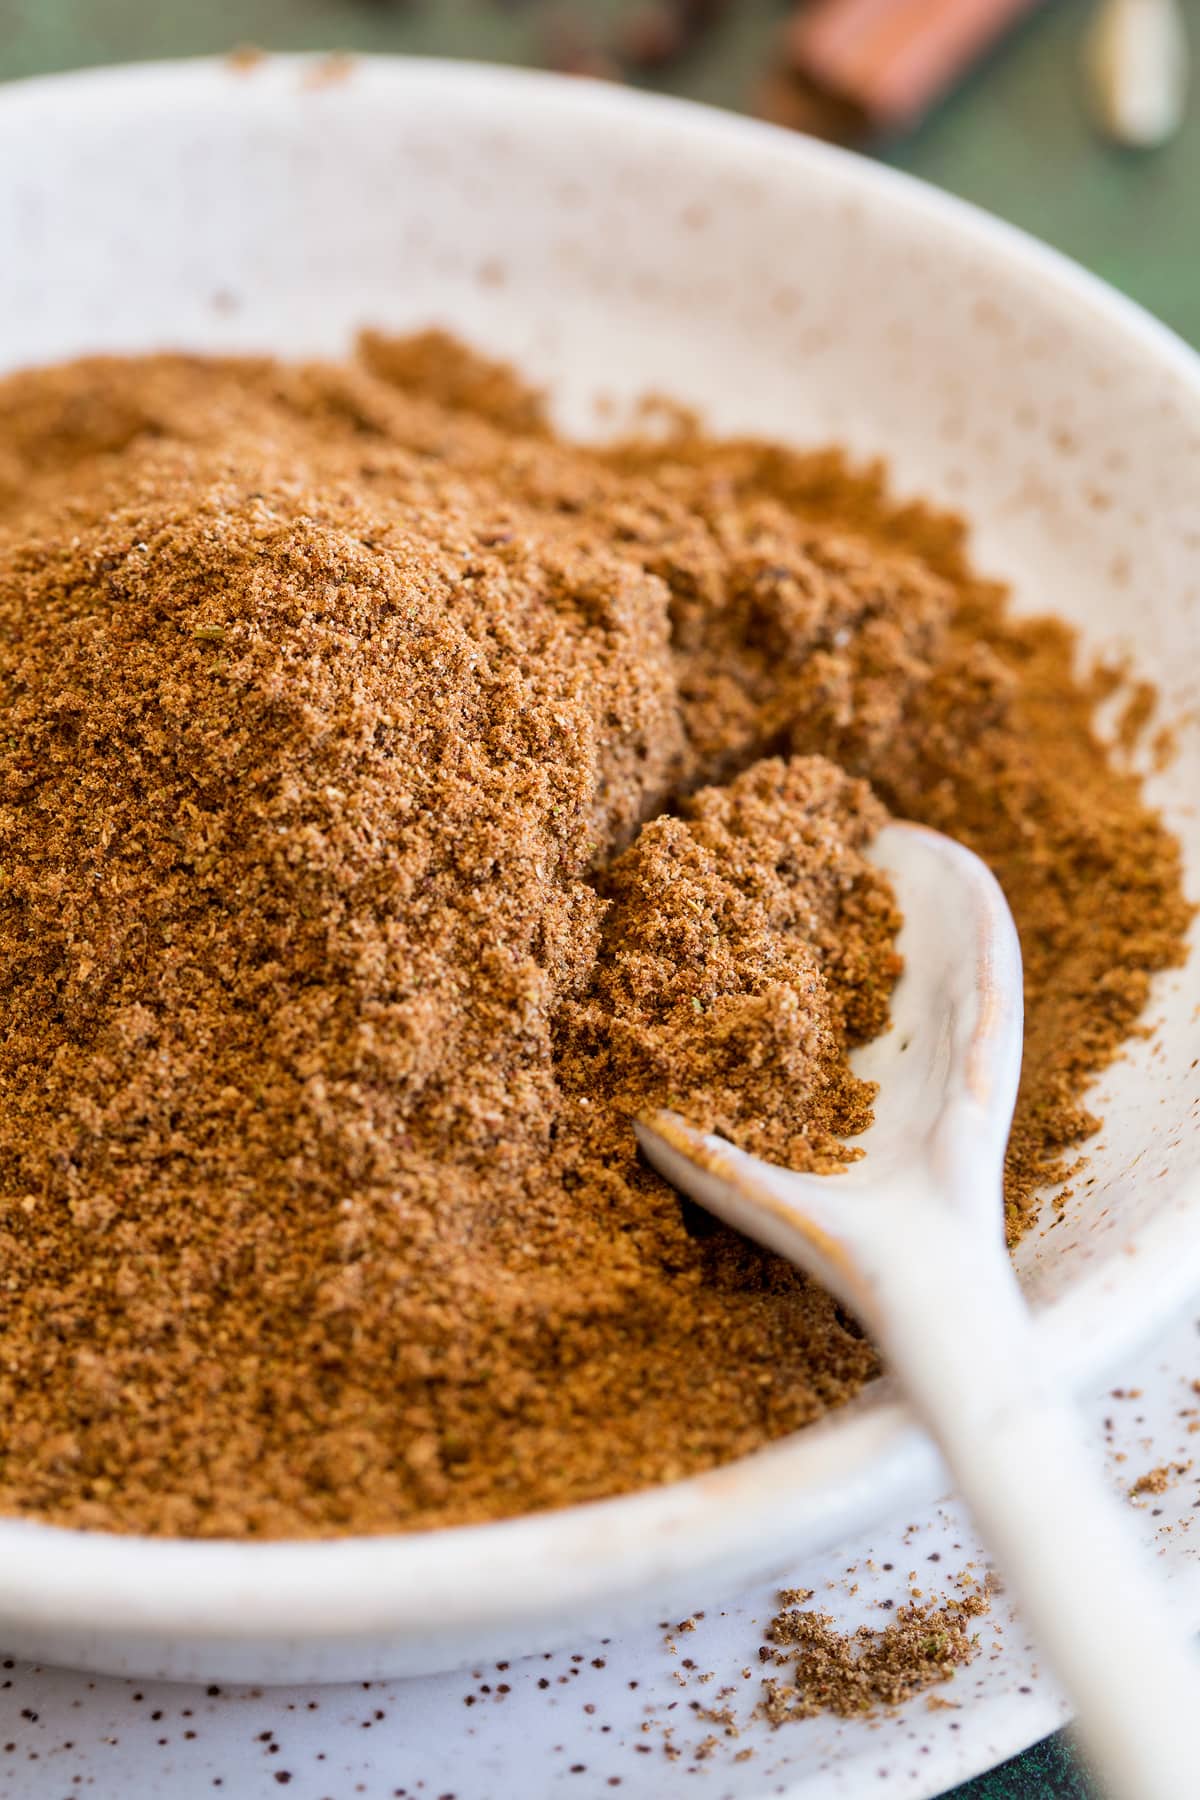 Garam masala spice blend shown up close in a bowl with a small spoon.